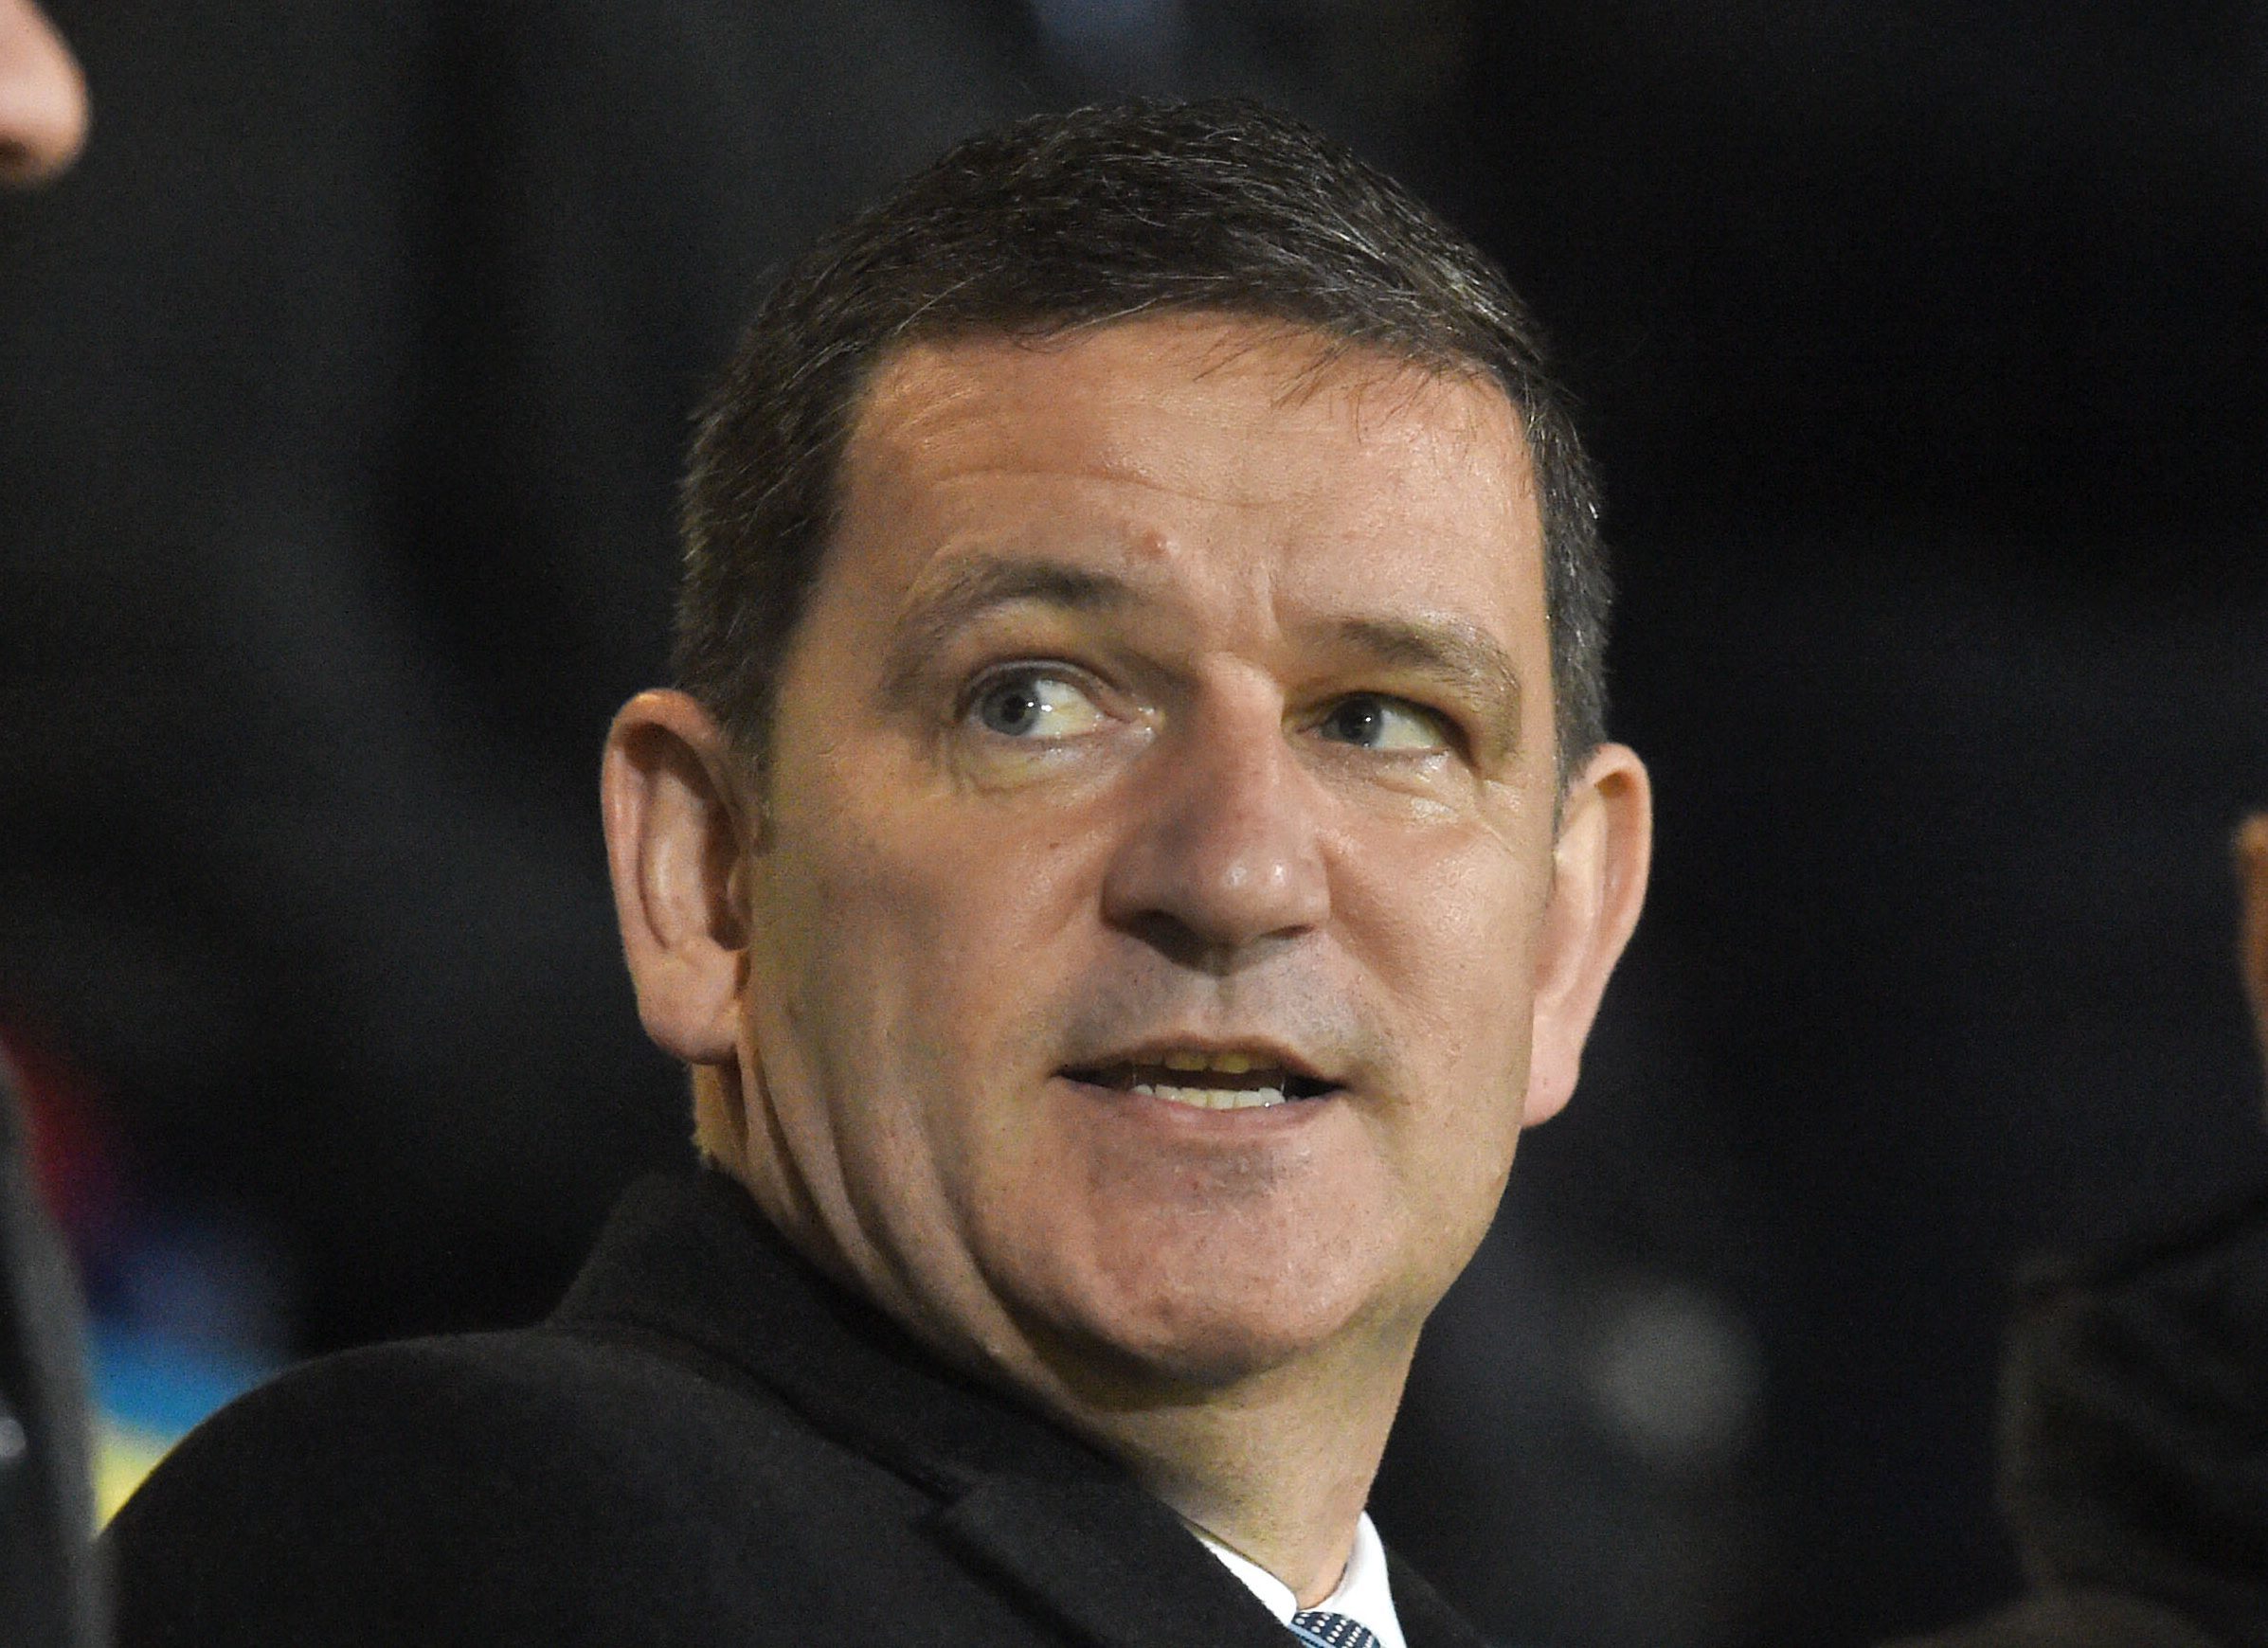 St Johnstone chairman Steve Brown is set to step aside. Image: SNS